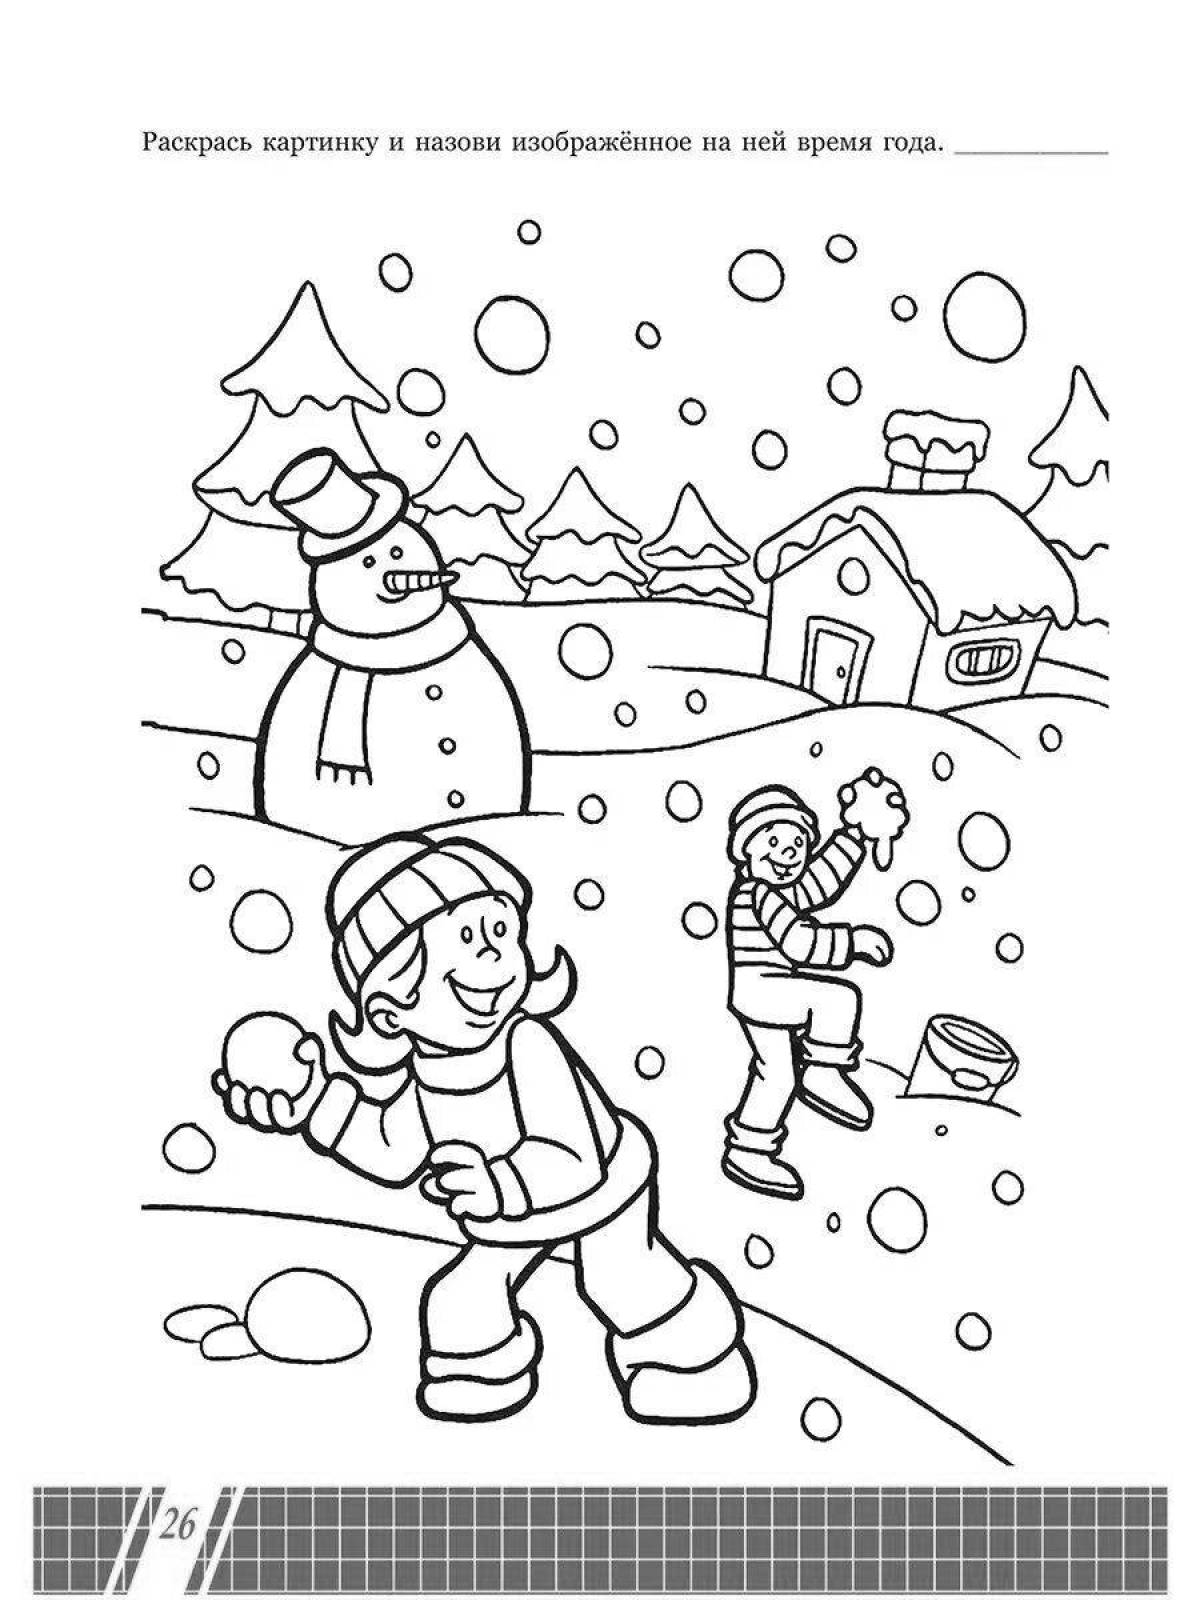 Whimsical winter coloring for preschoolers